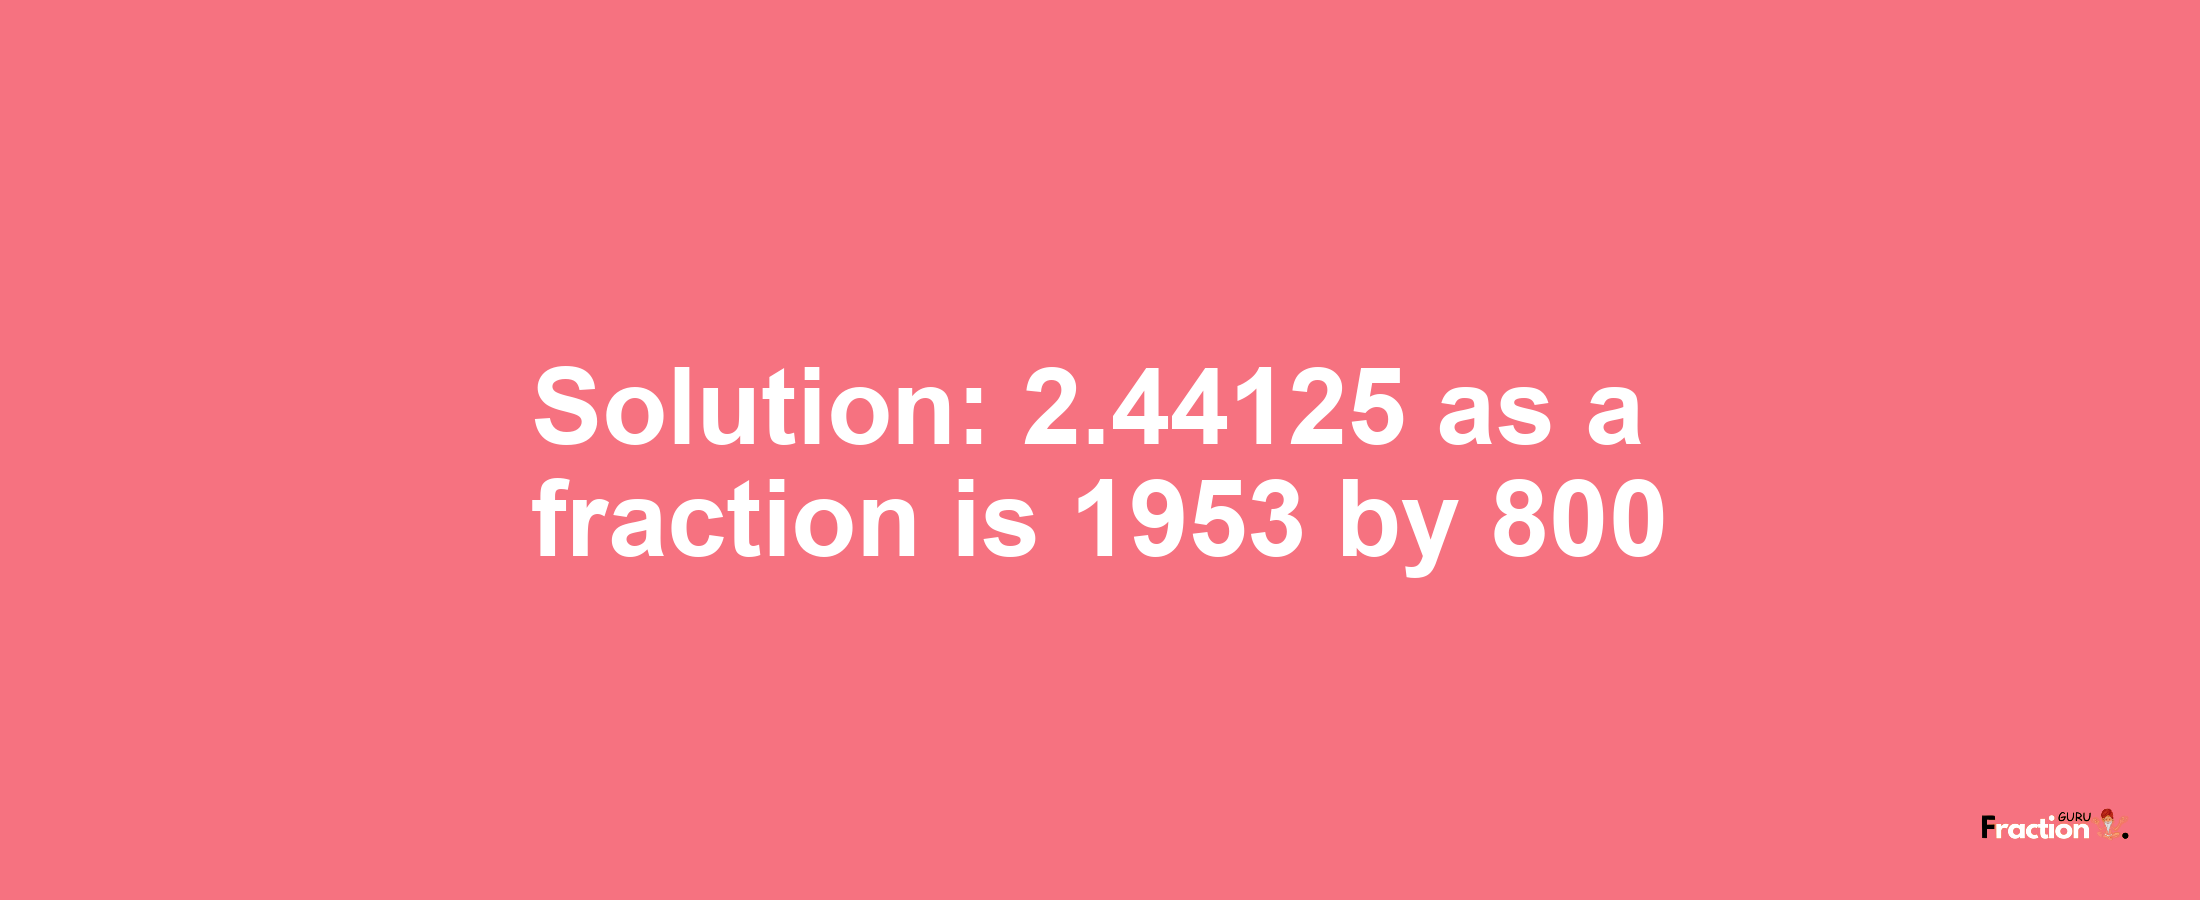 Solution:2.44125 as a fraction is 1953/800